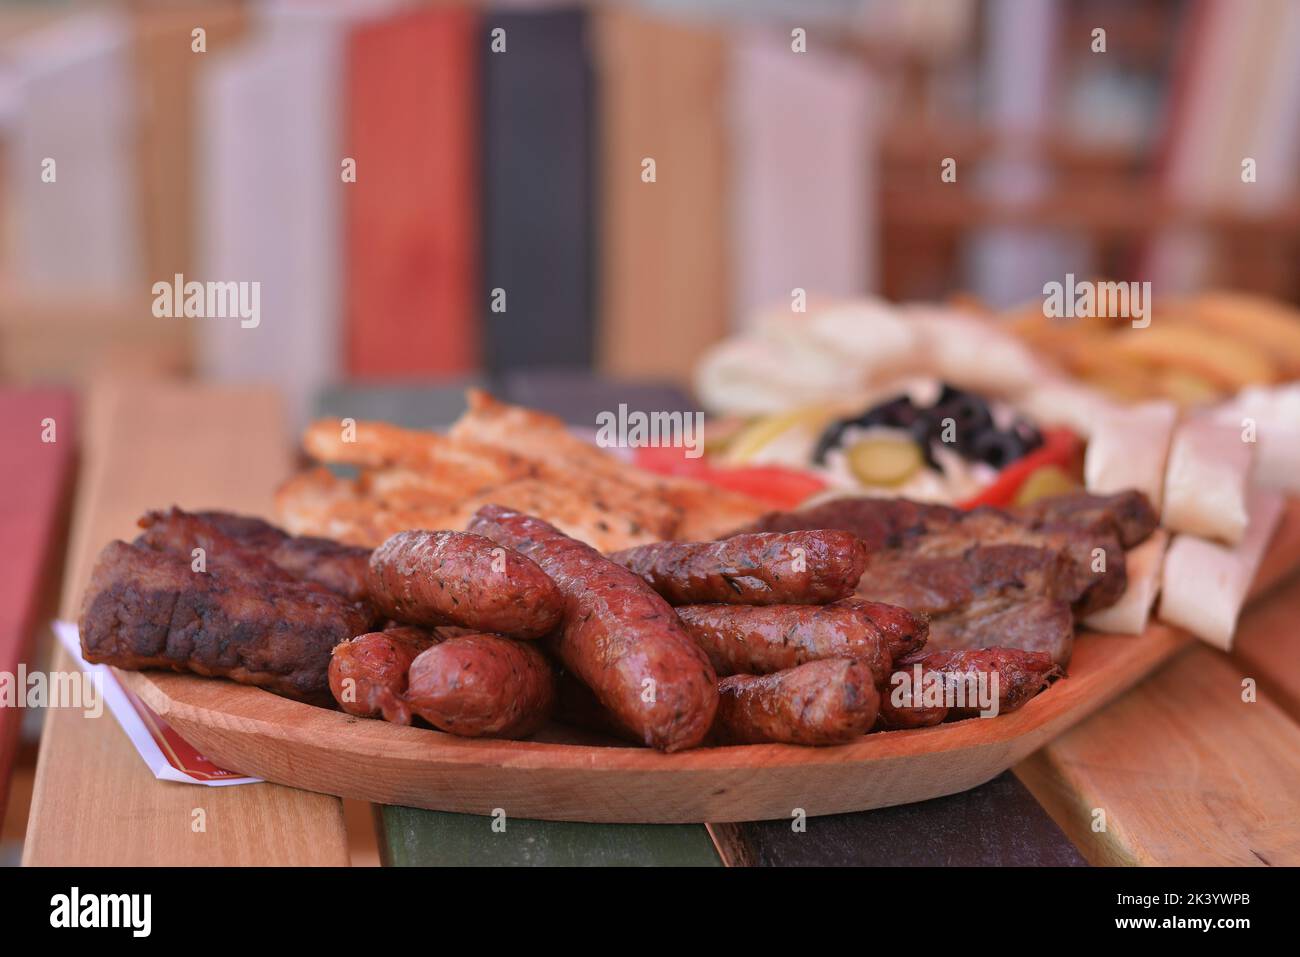 Fried sausages with herbs and grilled meat, all placed on a wooden tray. Stock Photo